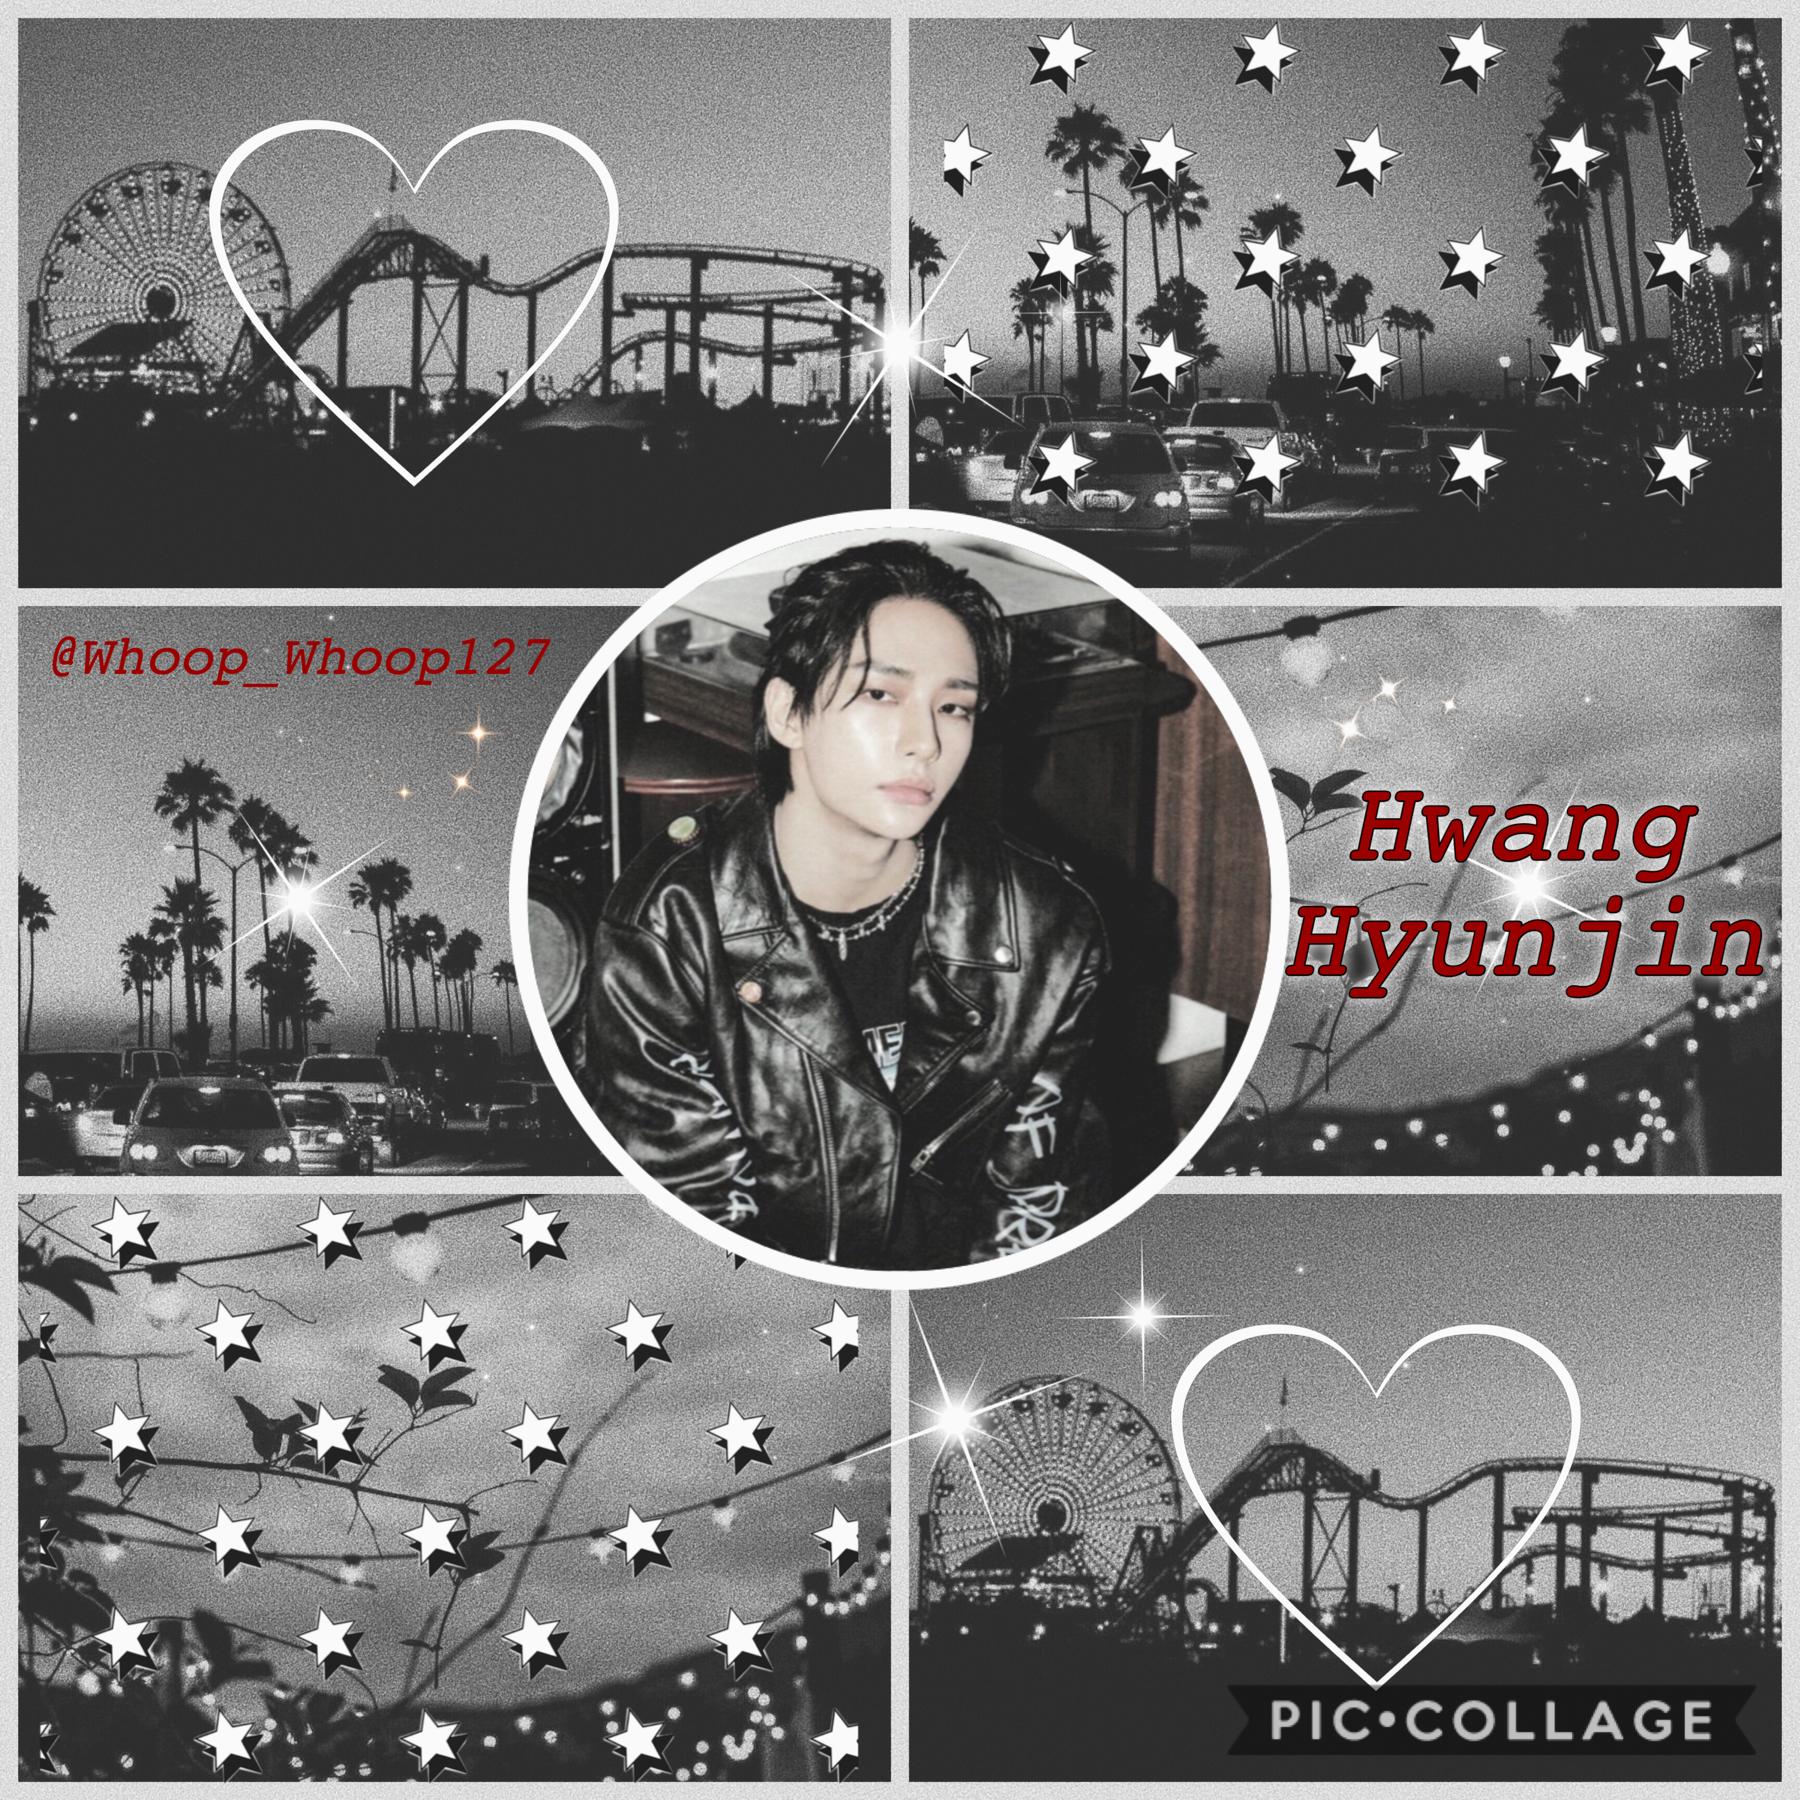 •🚒•
🌻Hyunjin~ Stray Kids🌻
Edit for @sxnachan!
I love my bby so much🥺🥺 Stan stray kids and listen to their newest album😼 they produced bops, as per usual❤️